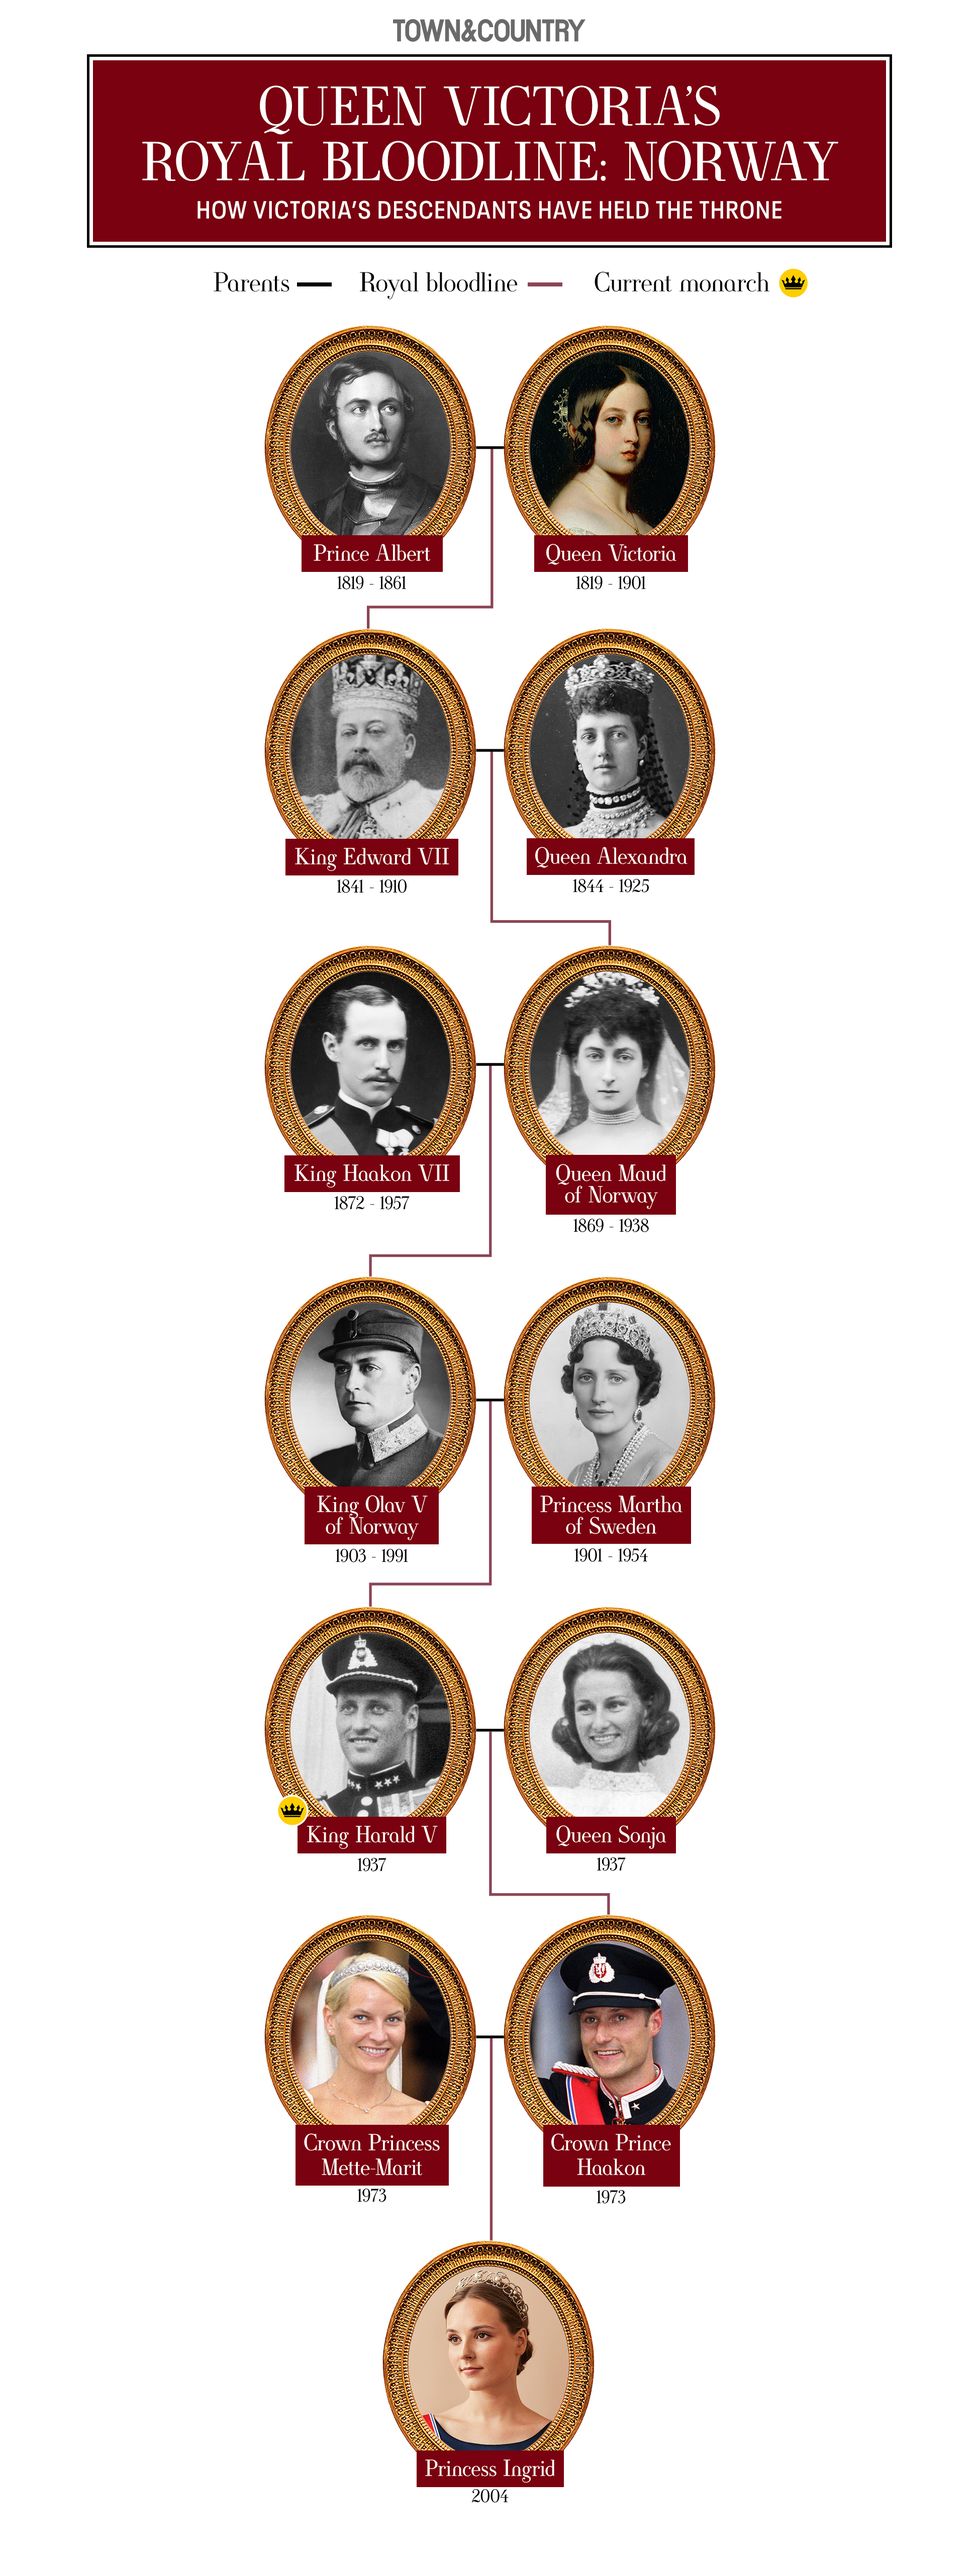 queen victoria royal family tree norway